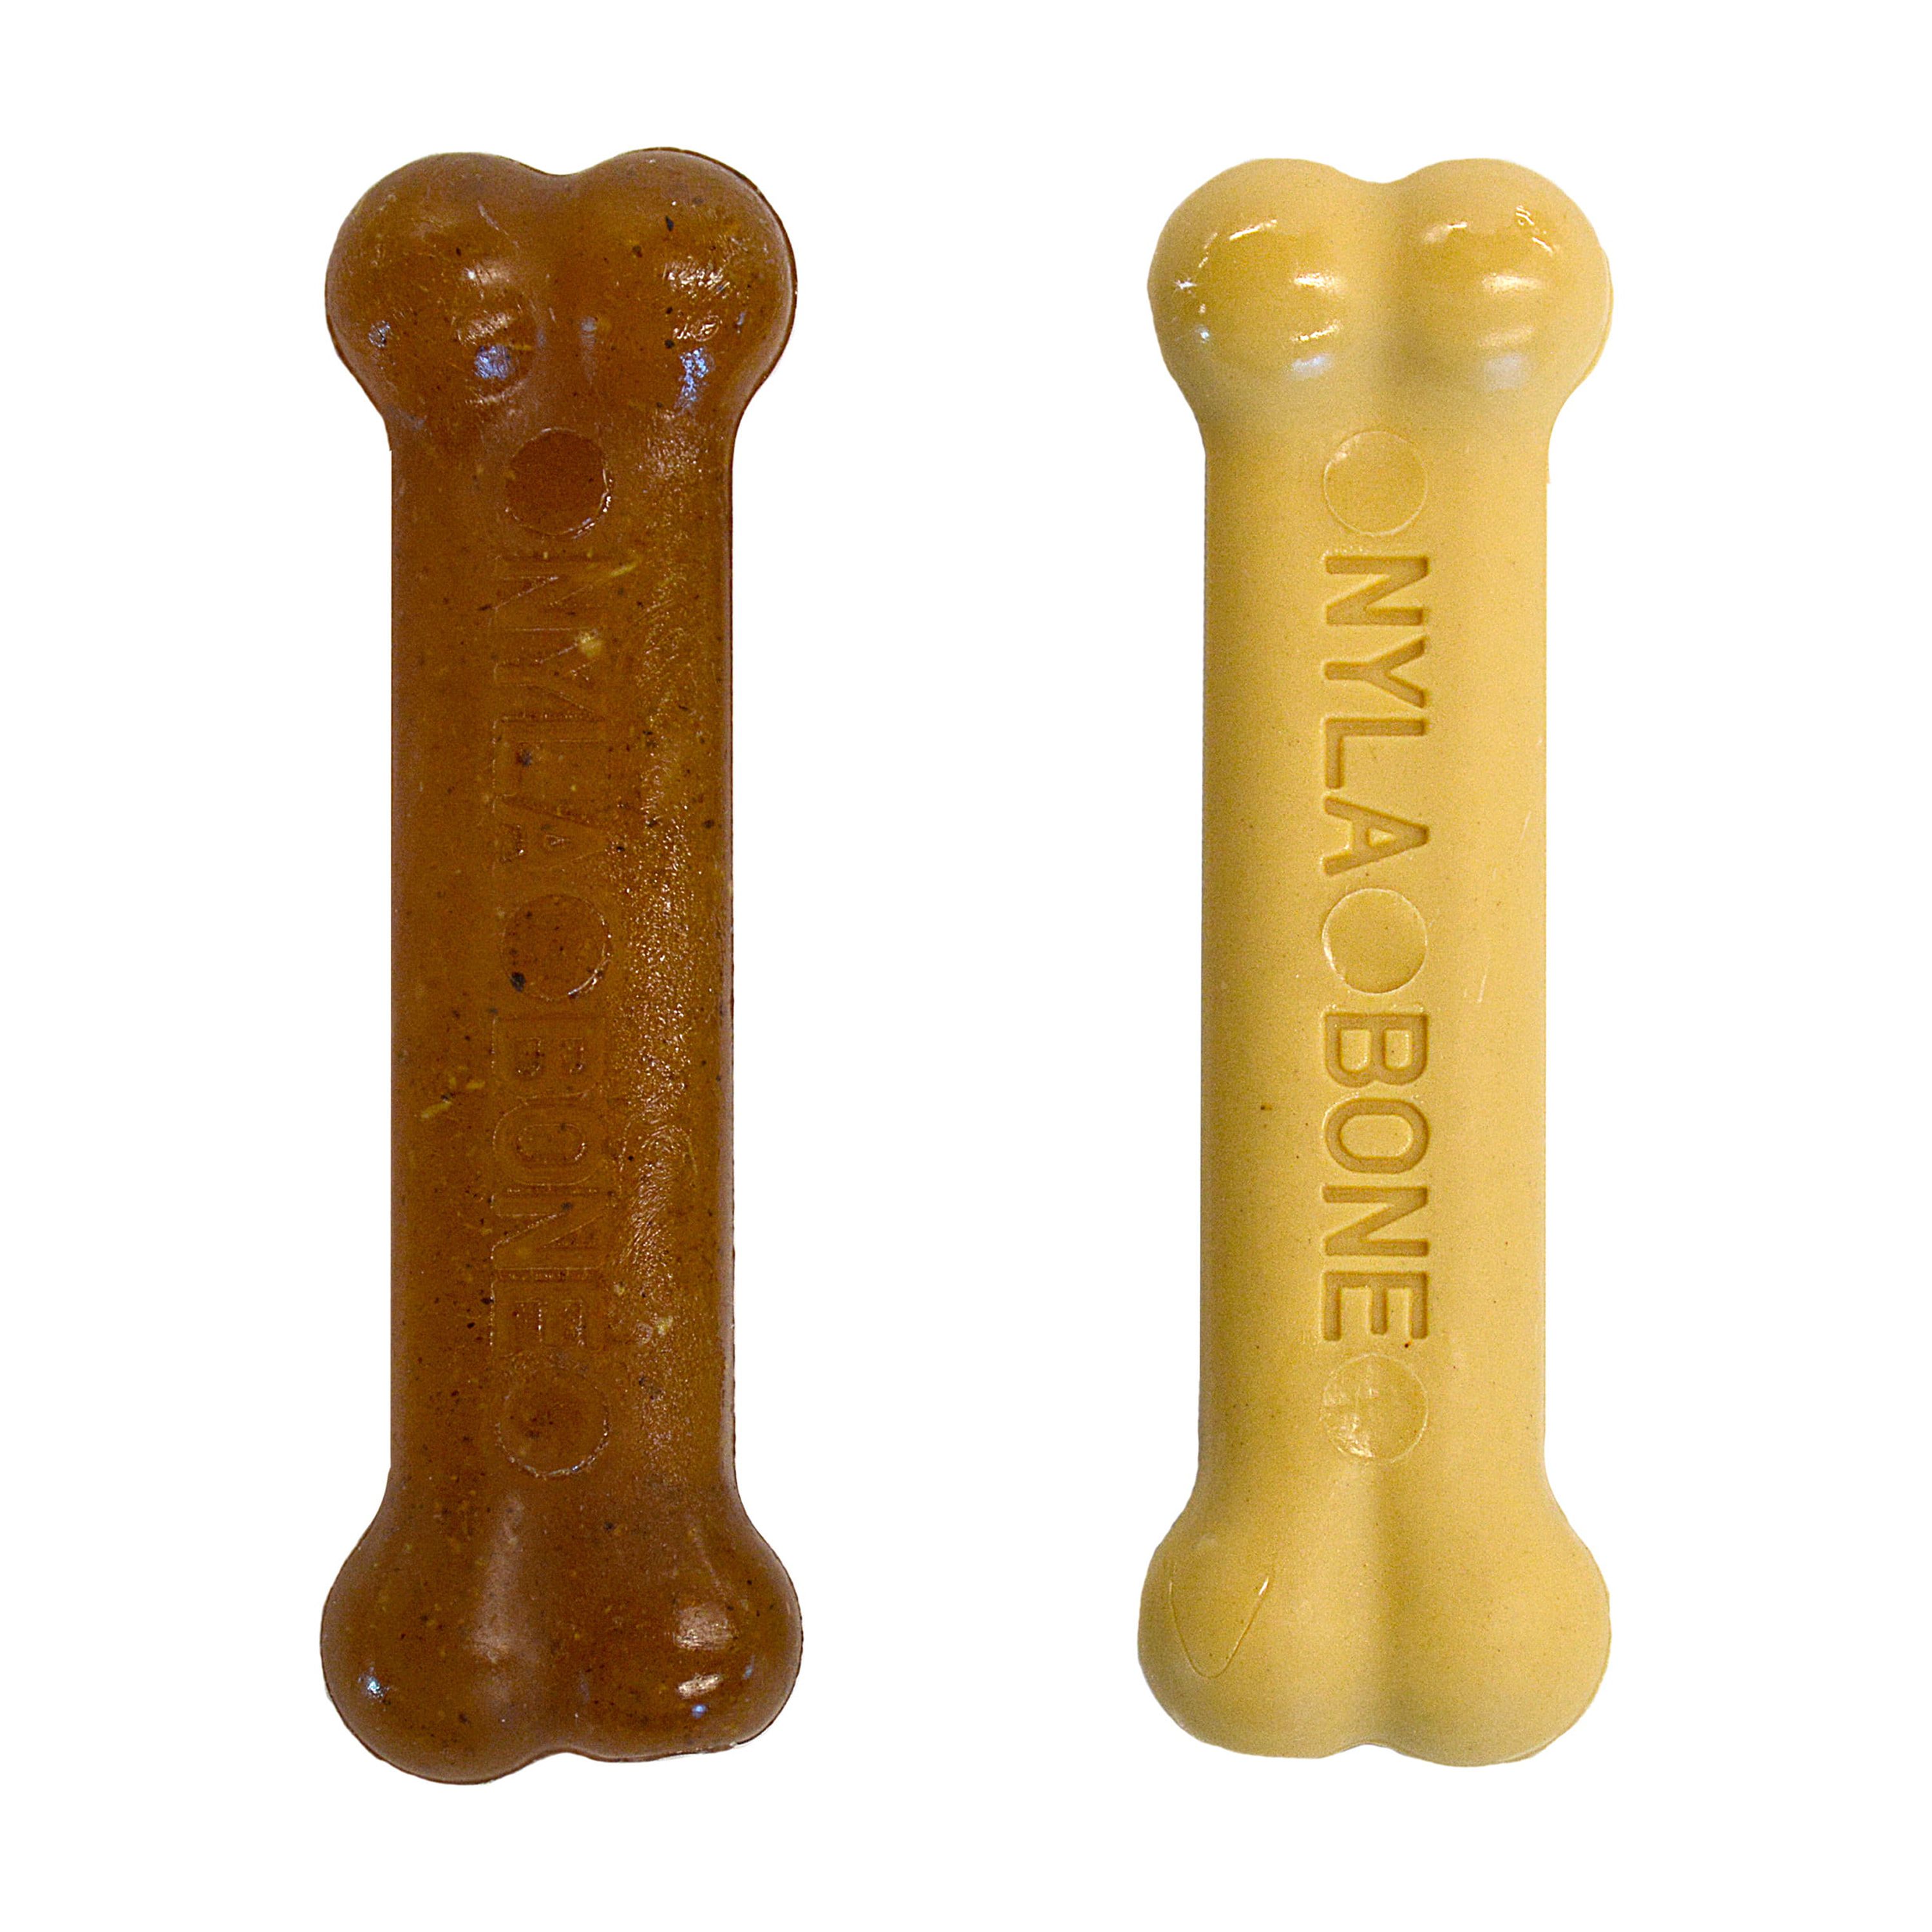 Nylabone Classic Puppy Chew Flavored Durable Dog Chew Toy Chicken & Peanut Butter Bone X-Small/Petite - Up to 15 lbs. (2 Count) - image 3 of 11